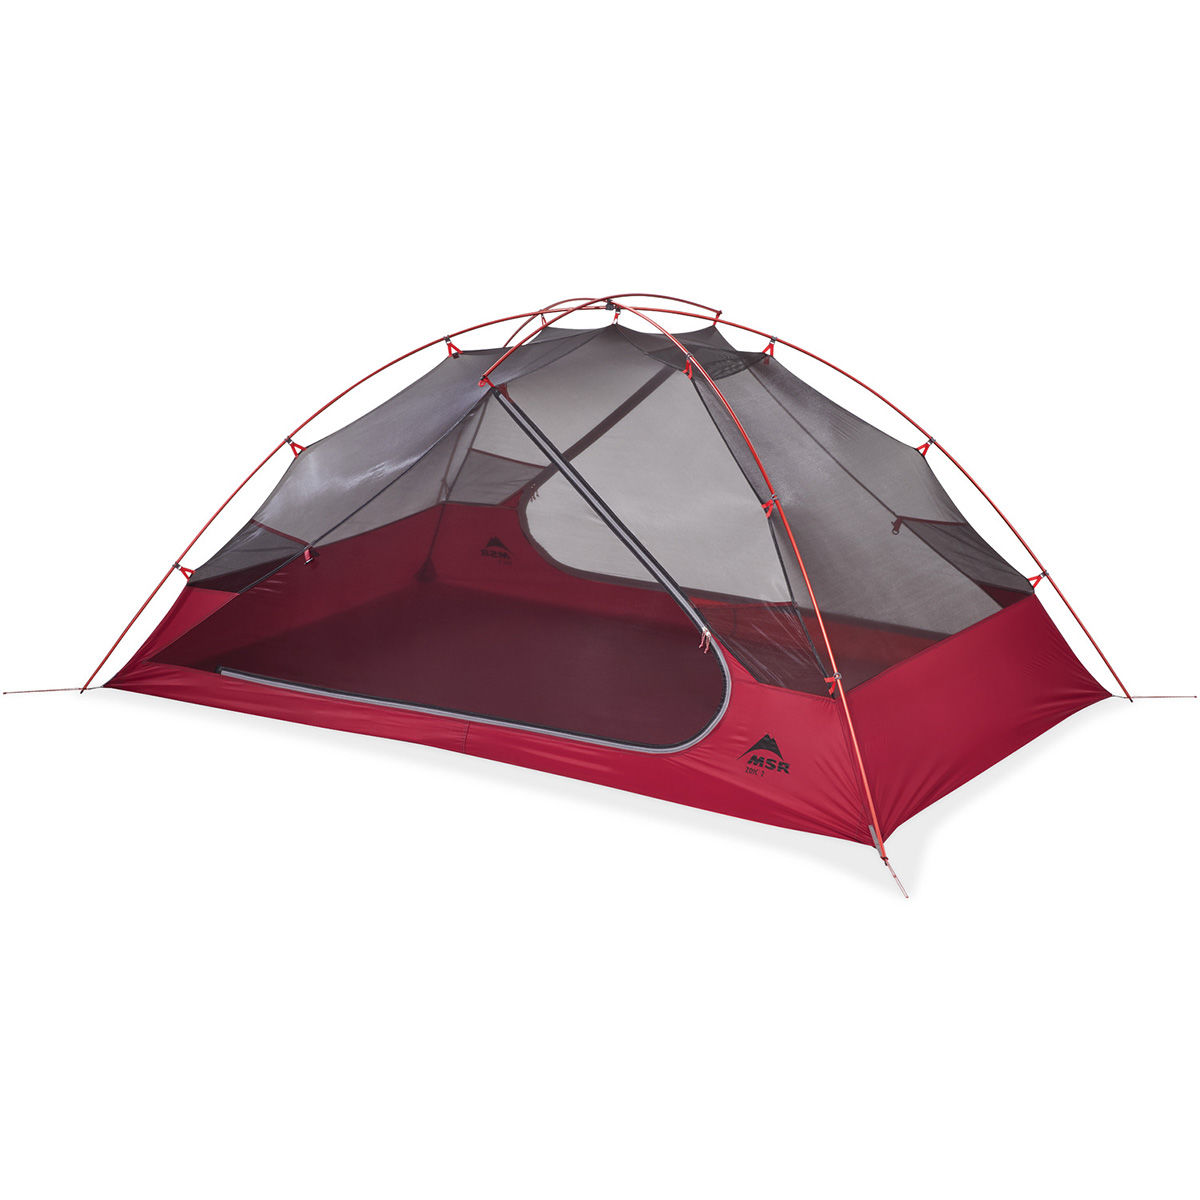 msr-zoic-2-backpacking-tent-2-people-g